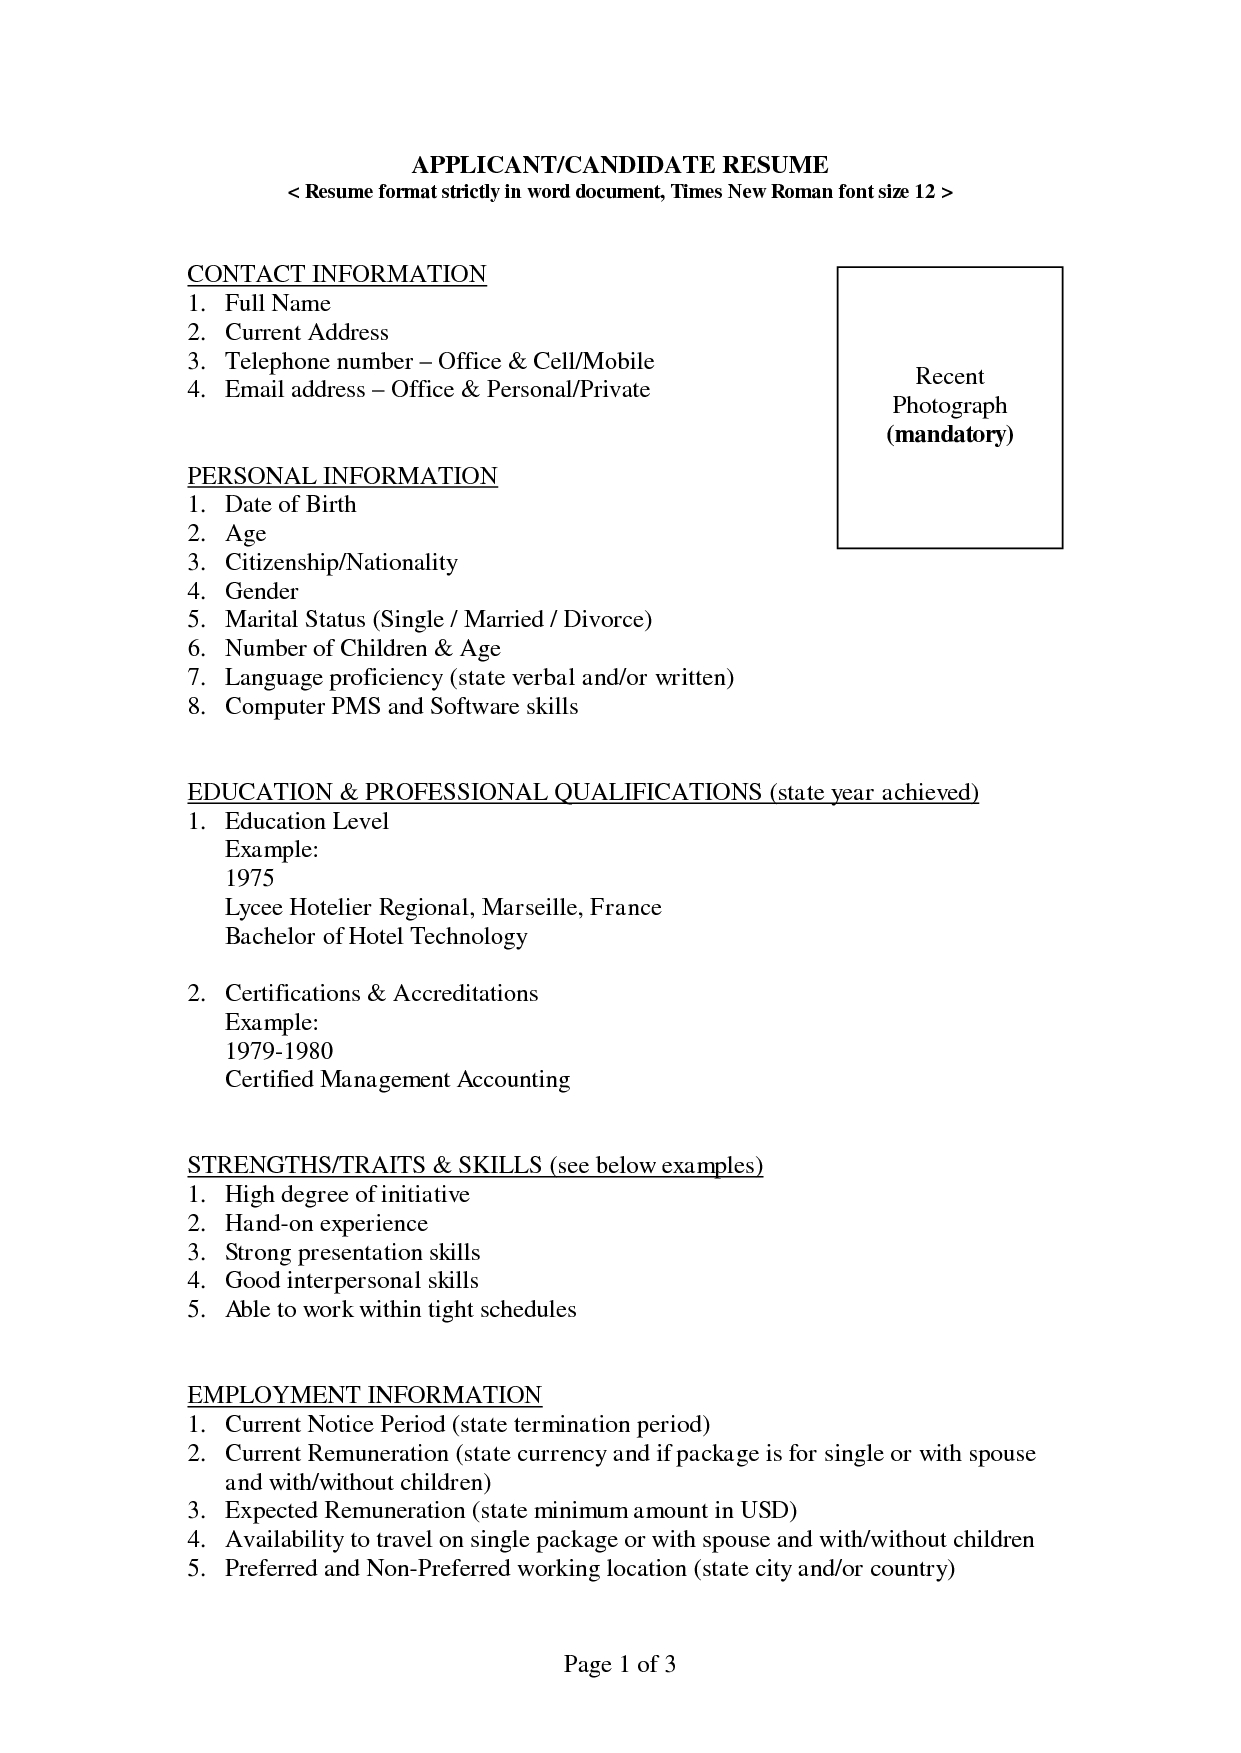 Free Blank Resume Templates For Microsoft Word | Resume Within Free Blank Resume Templates For Microsoft Word